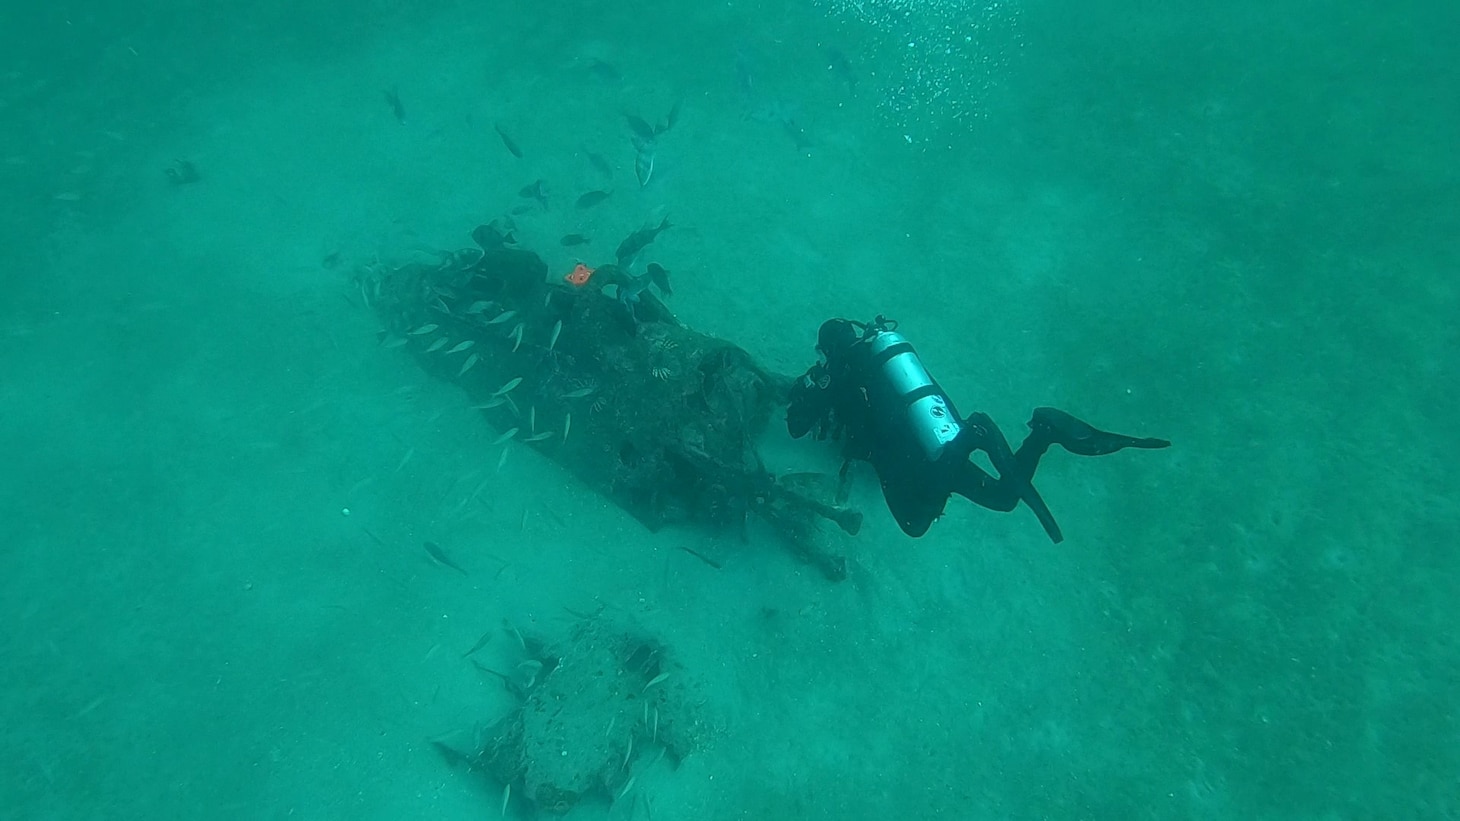 Dr. George Schwarz, NHHC Underwater Archaeologist, documents the F8F Bearcat wreck site off NAS Pensacola